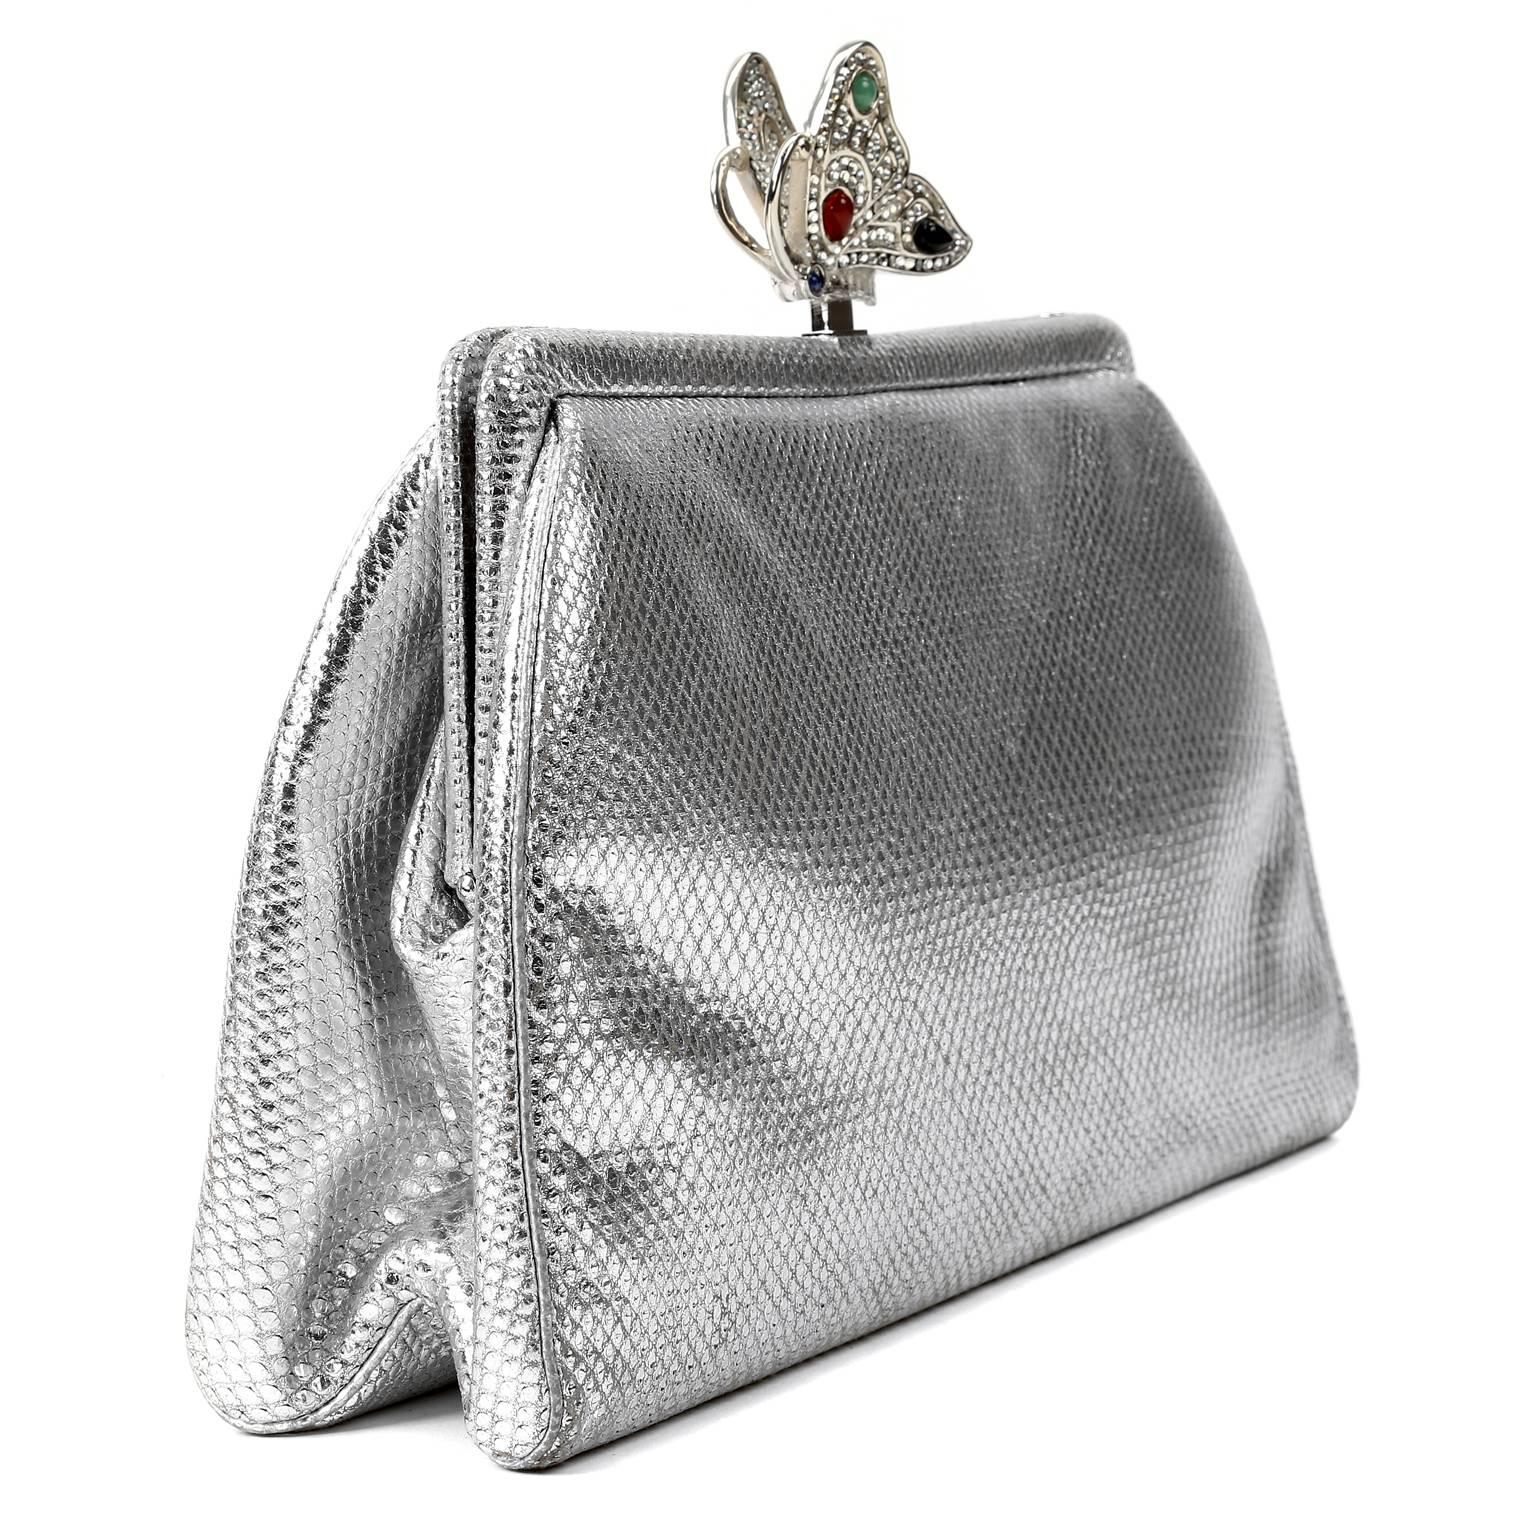 Judith Leiber Silver Lizard Clutch- excellent condition other than a small pen mark on the interior lining.  
The jeweled butterfly sitting atop the clutch elevates this lovely bag to a piece of art.
 
Metallic silver lizard skin clutch is